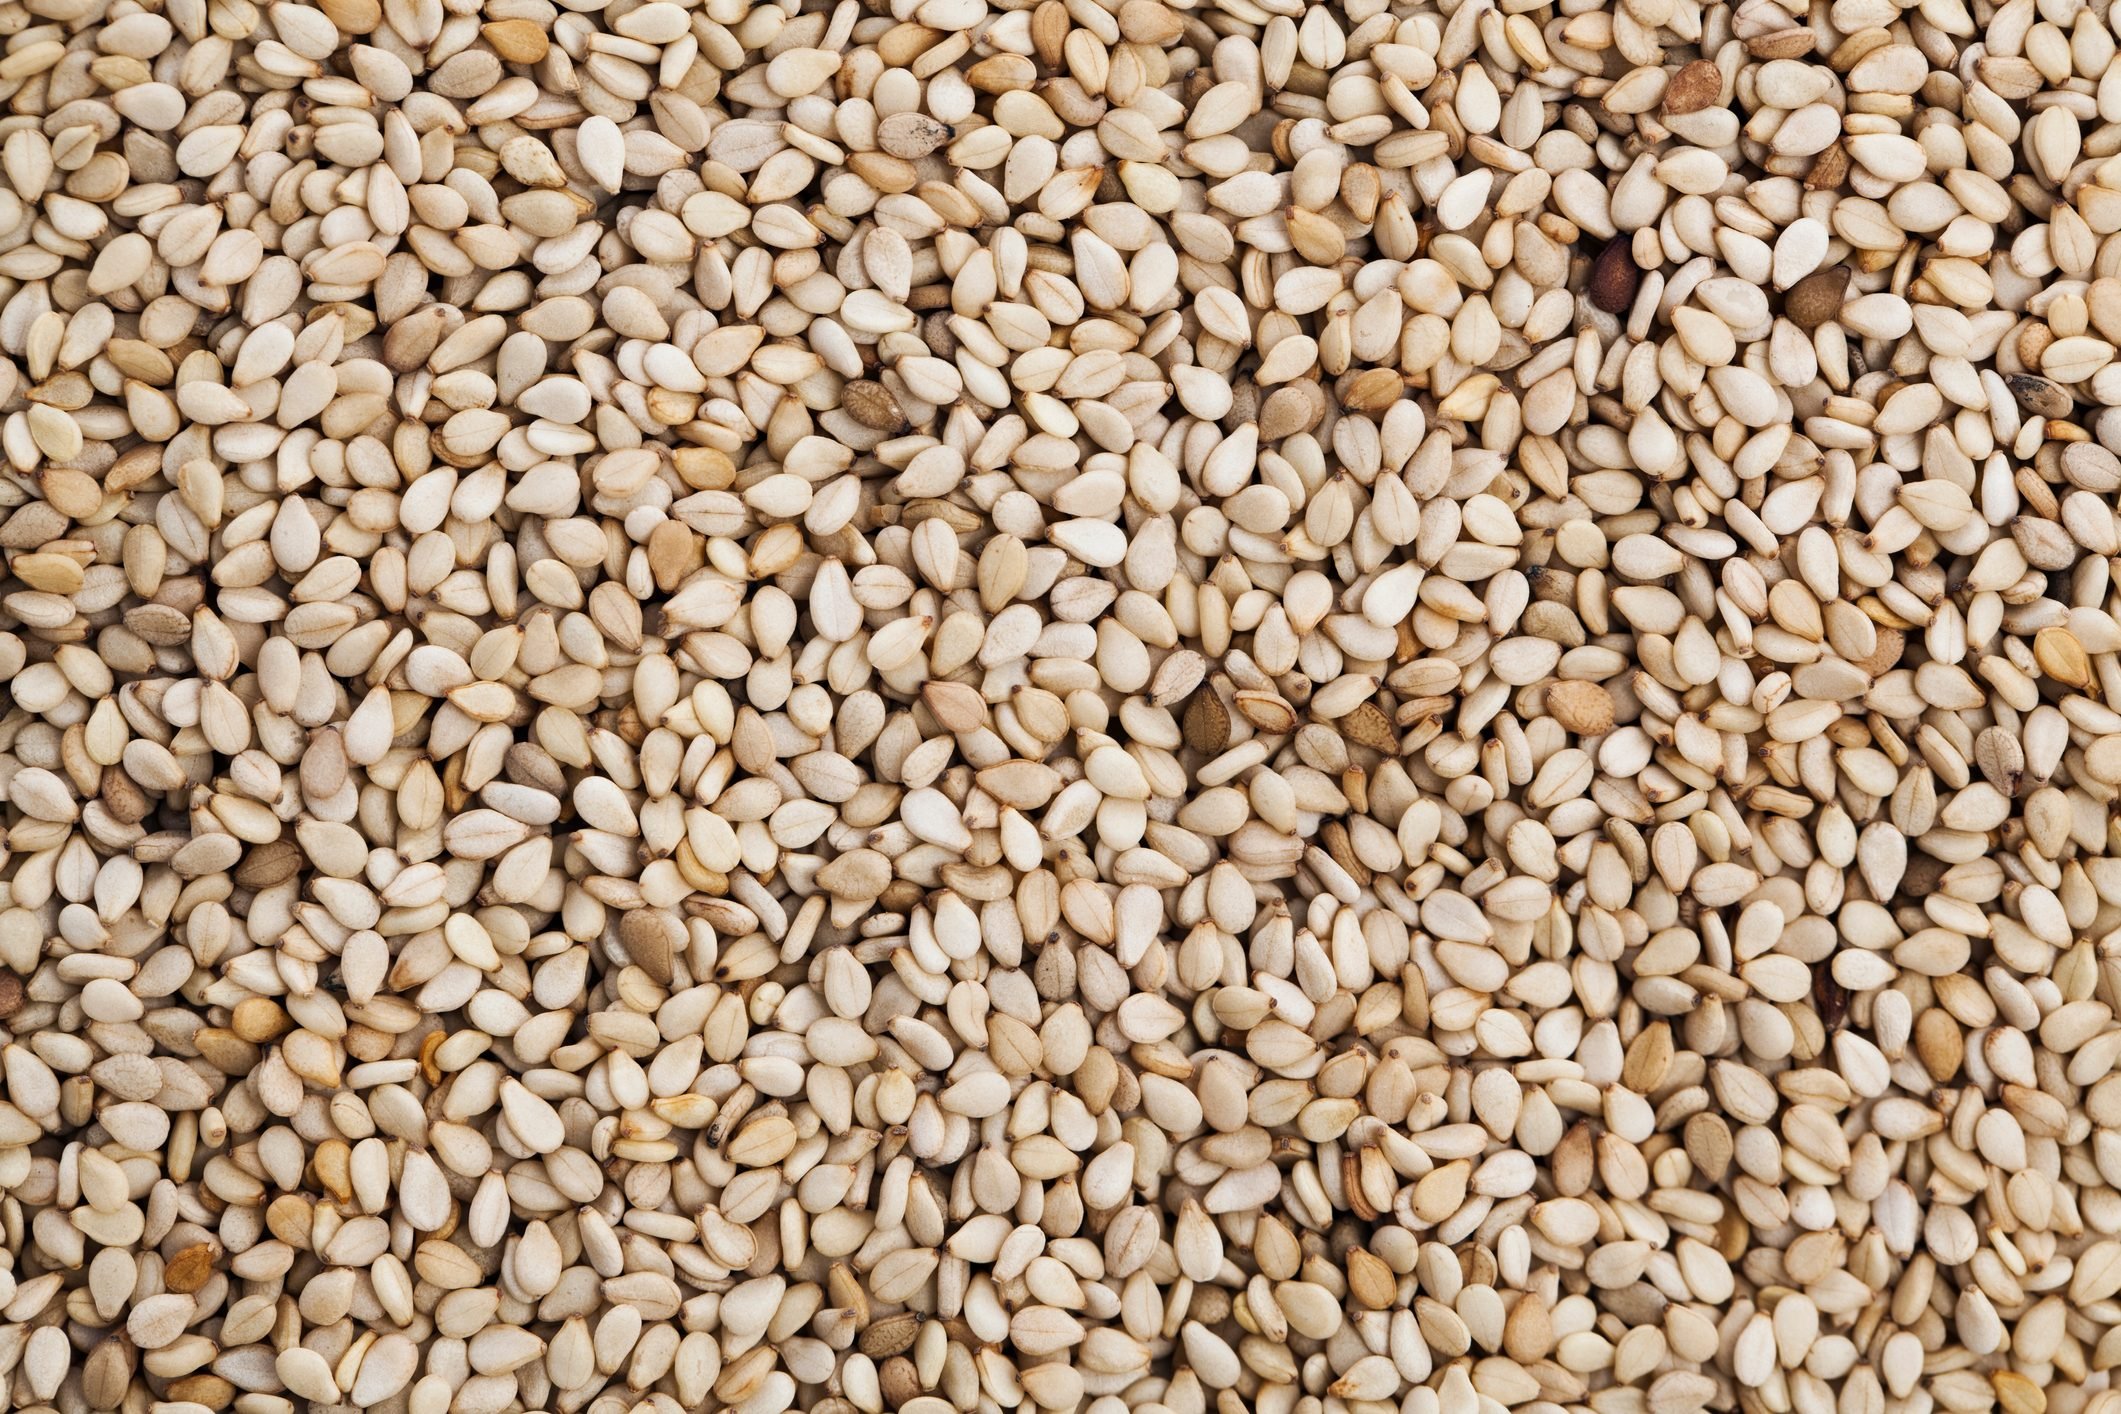 Should You Eat Sesame Seeds? Here Are the Benefits, Nutrition, and How to Eat Them